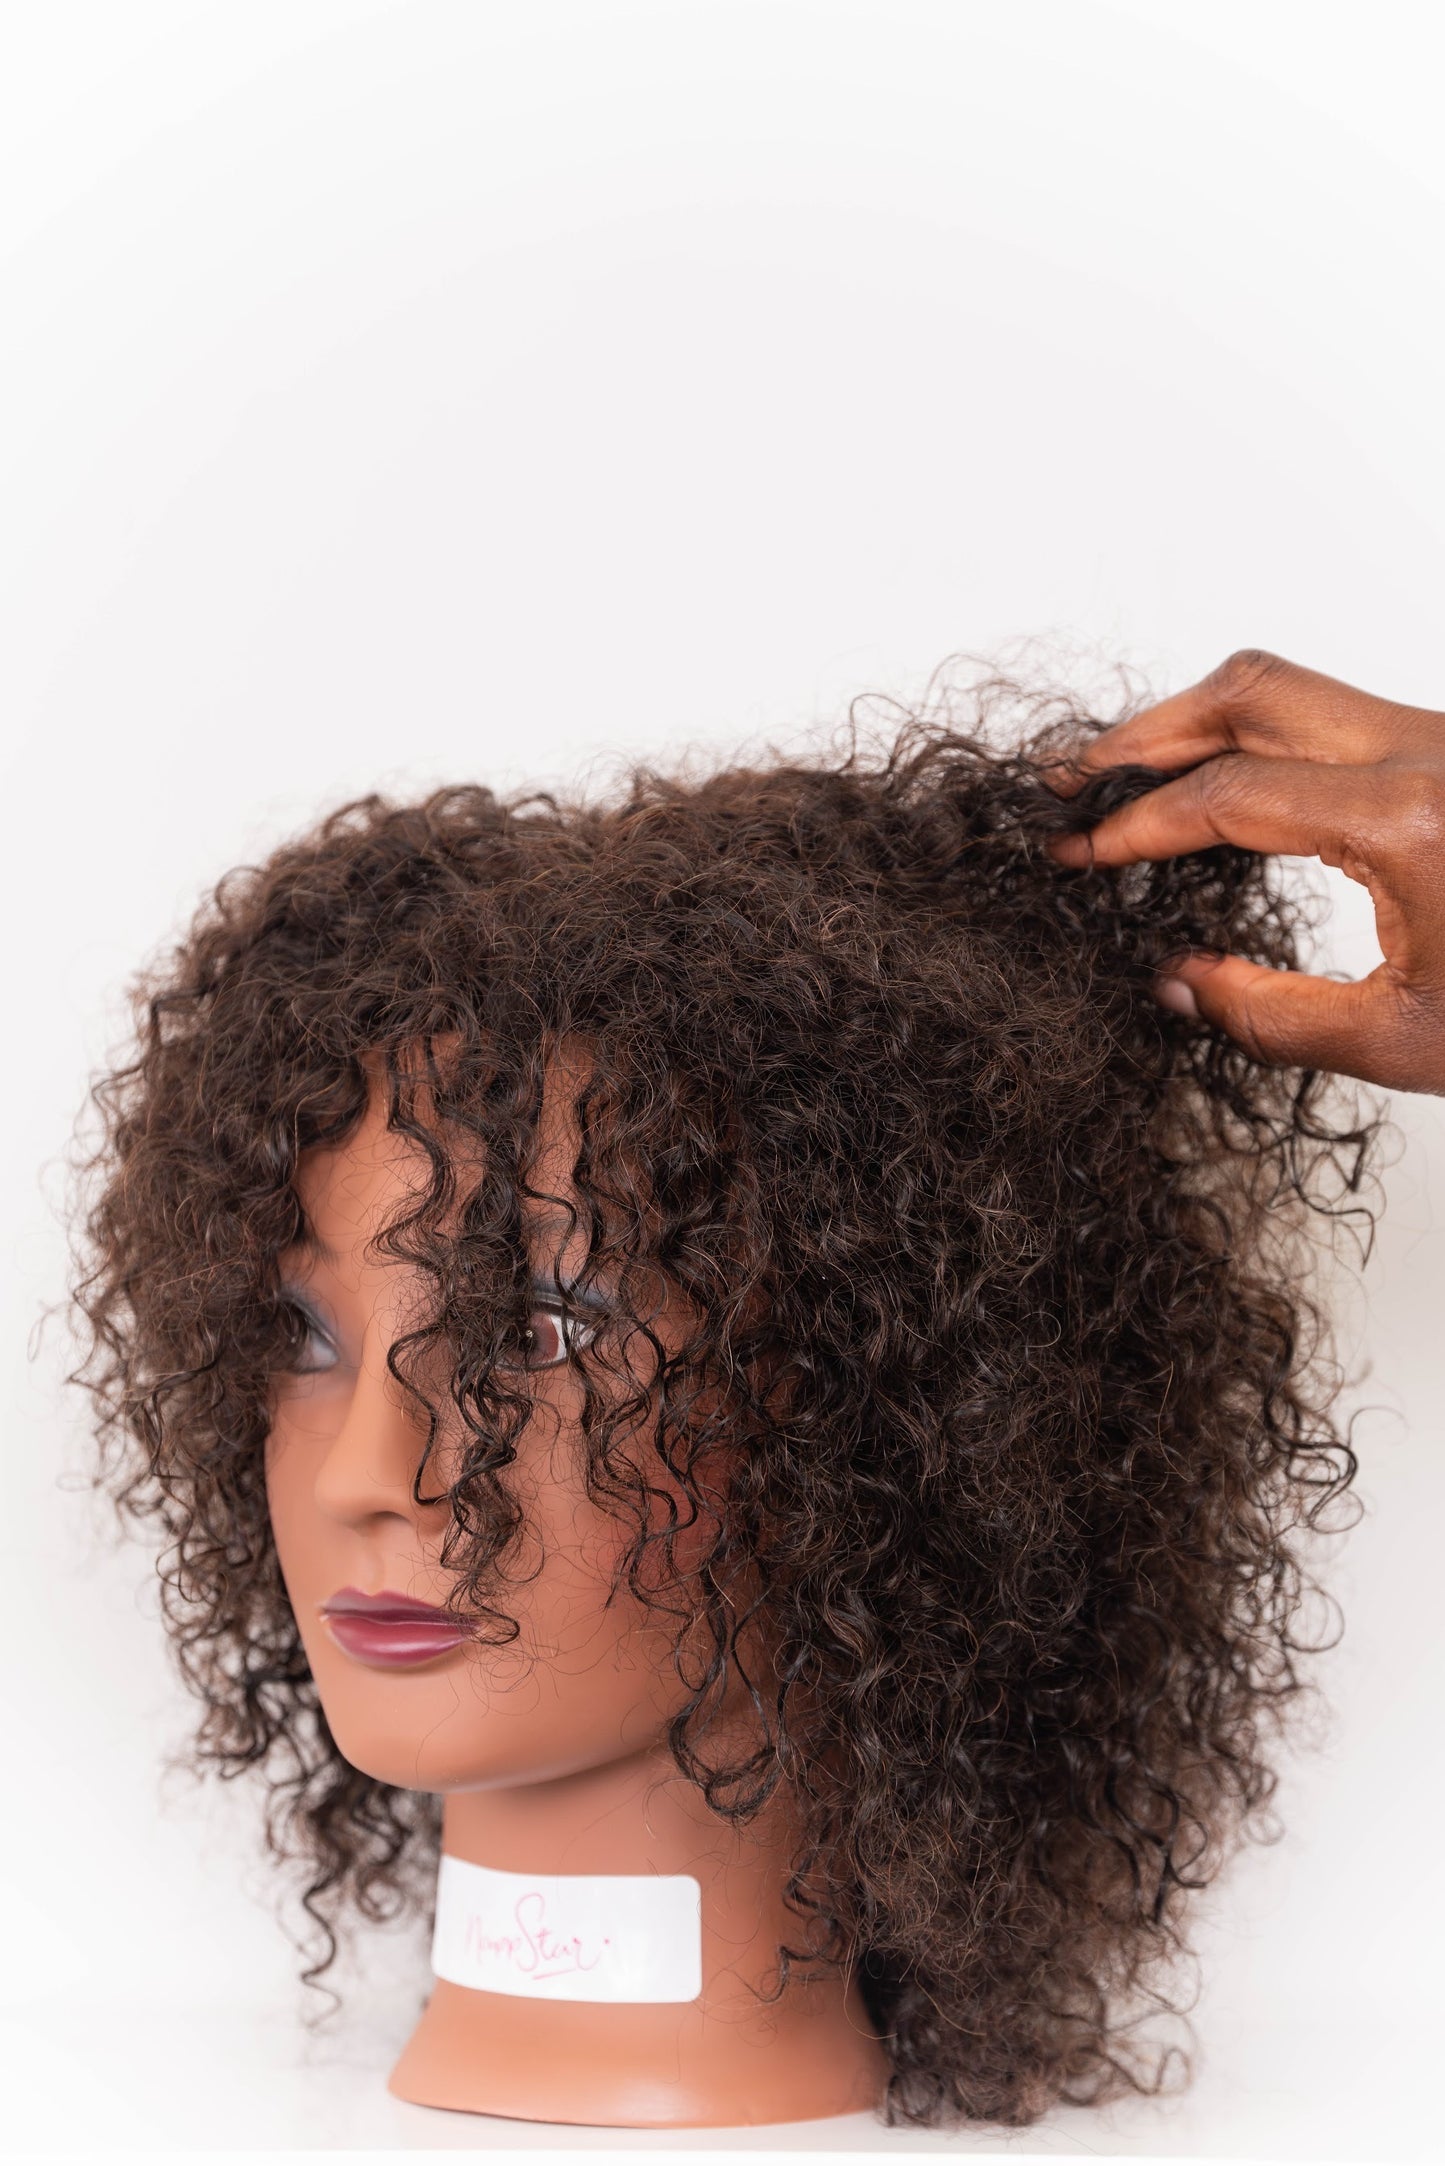 Afro Mannequin Head Curly Hair 100% African American Human Hair